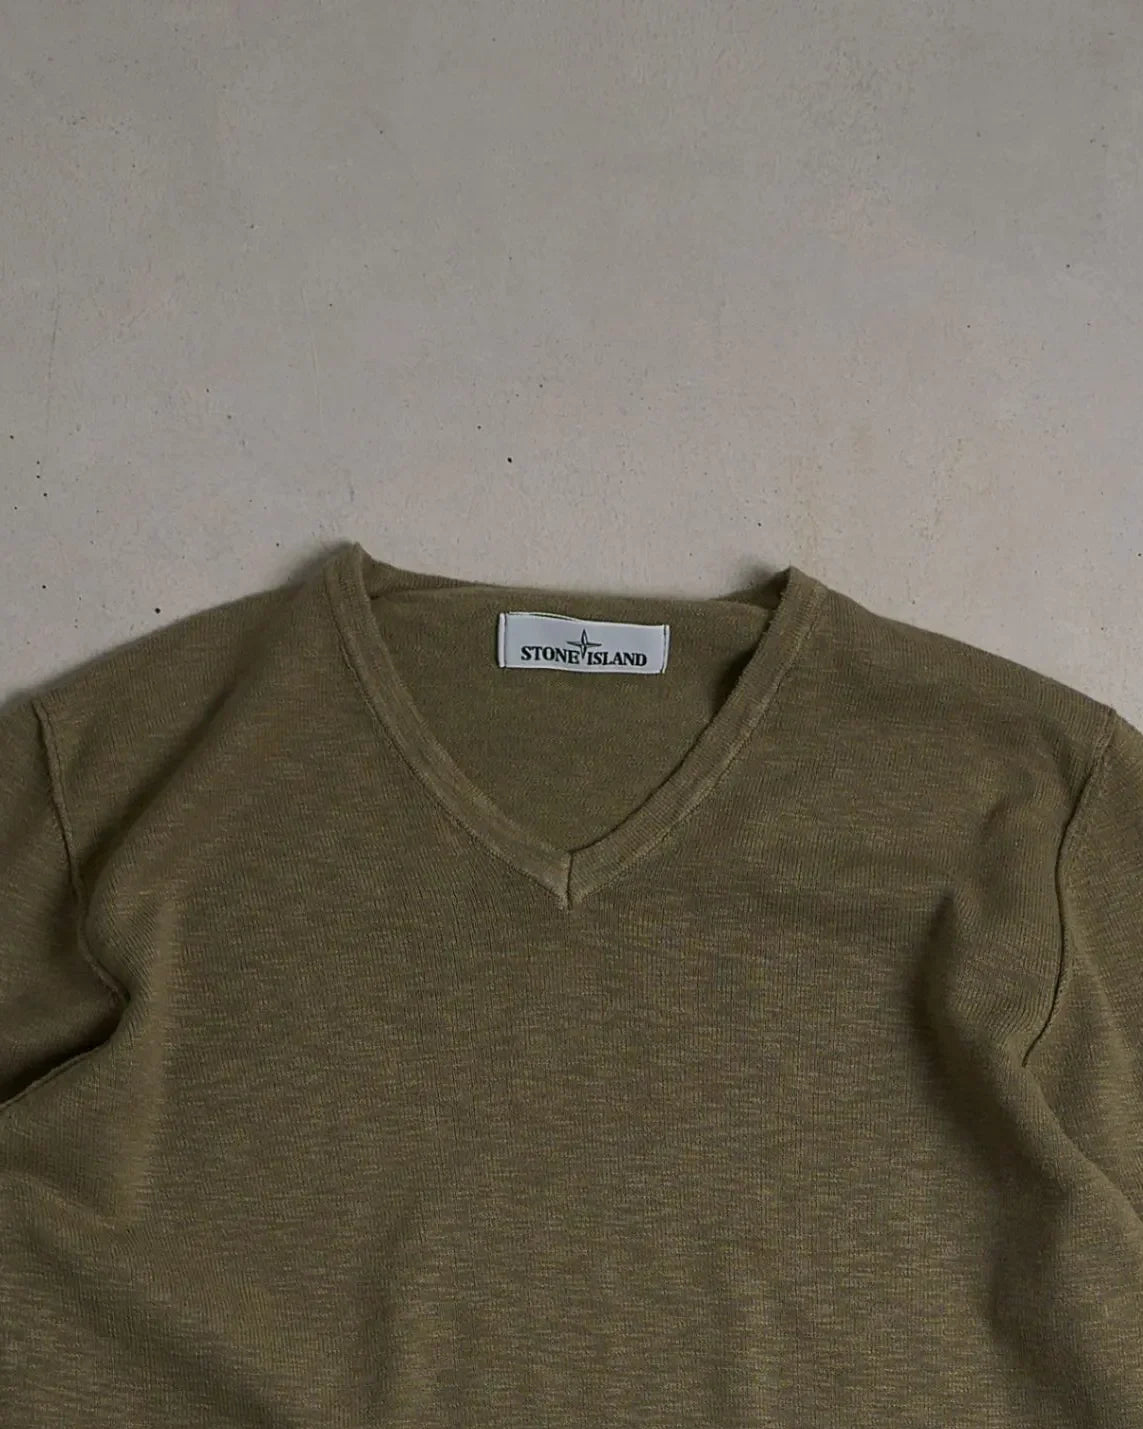 Vintage Stone Island Sweater SS 2018 Top